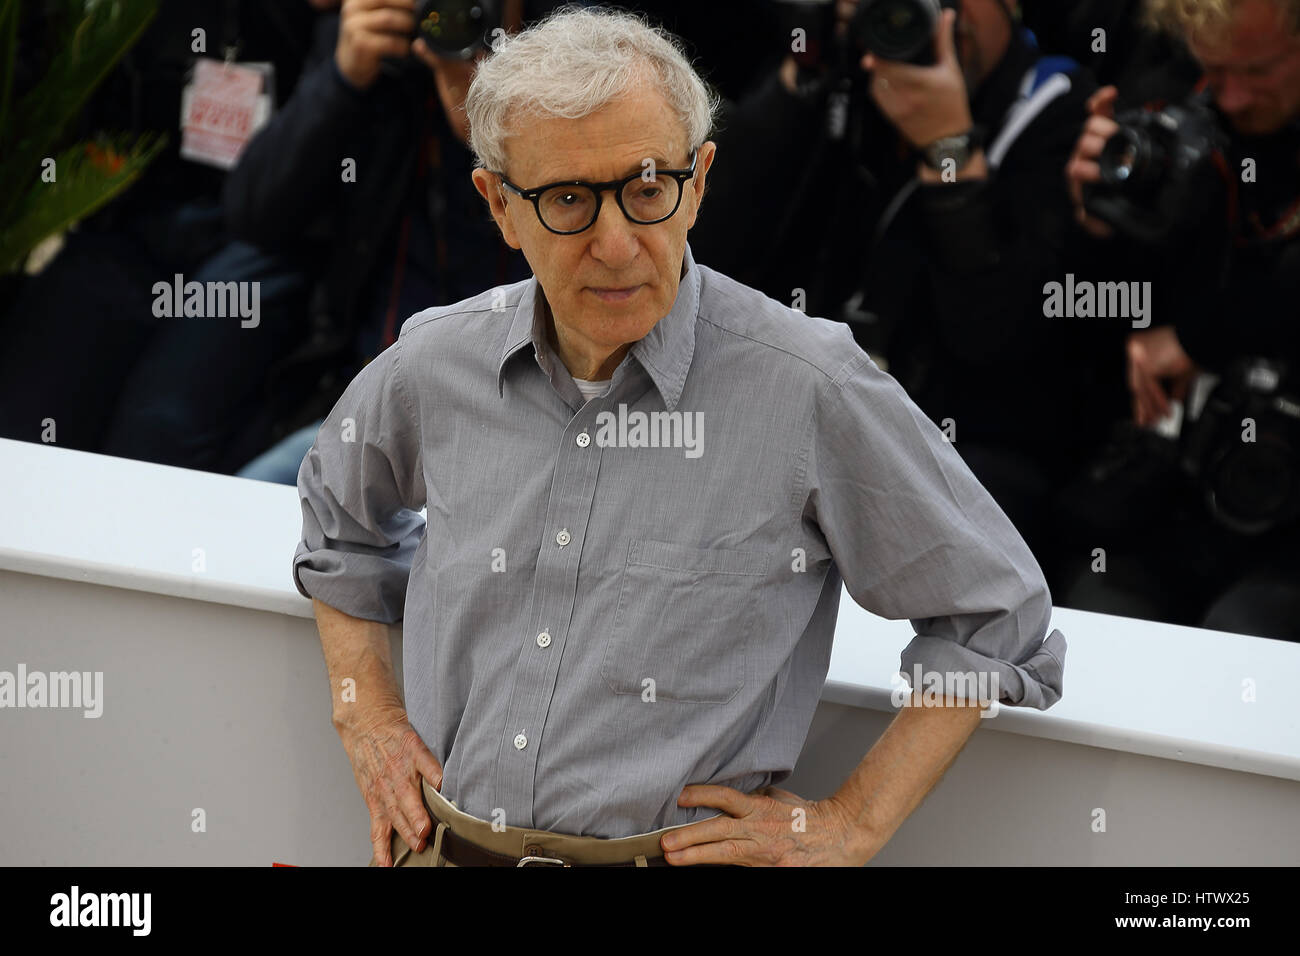 Woody allen cafe at society photocall  at 69th annual cannes Film festival | Woody allen au photocall du film café society au 69 eme festival du film  Stock Photo